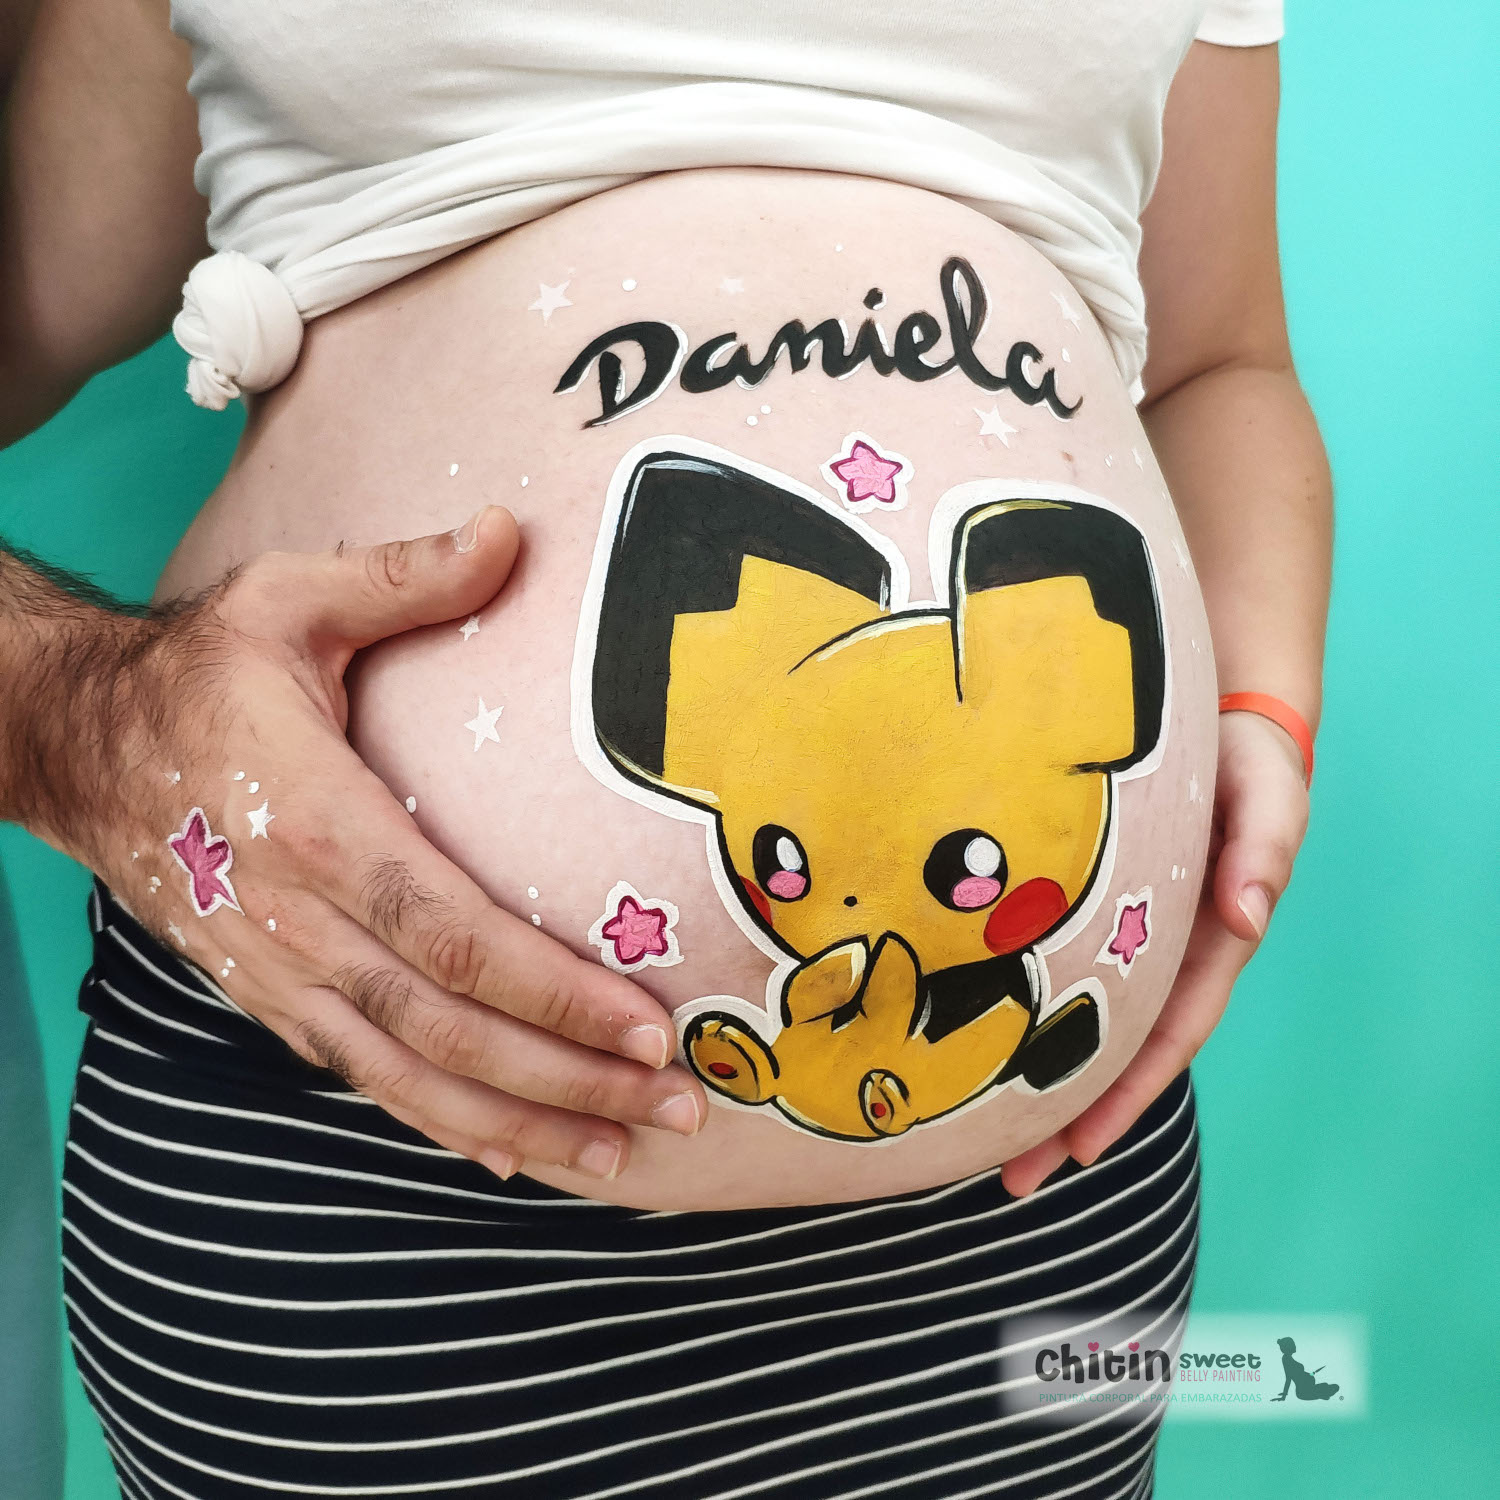 bellypainting-pichu-valencia